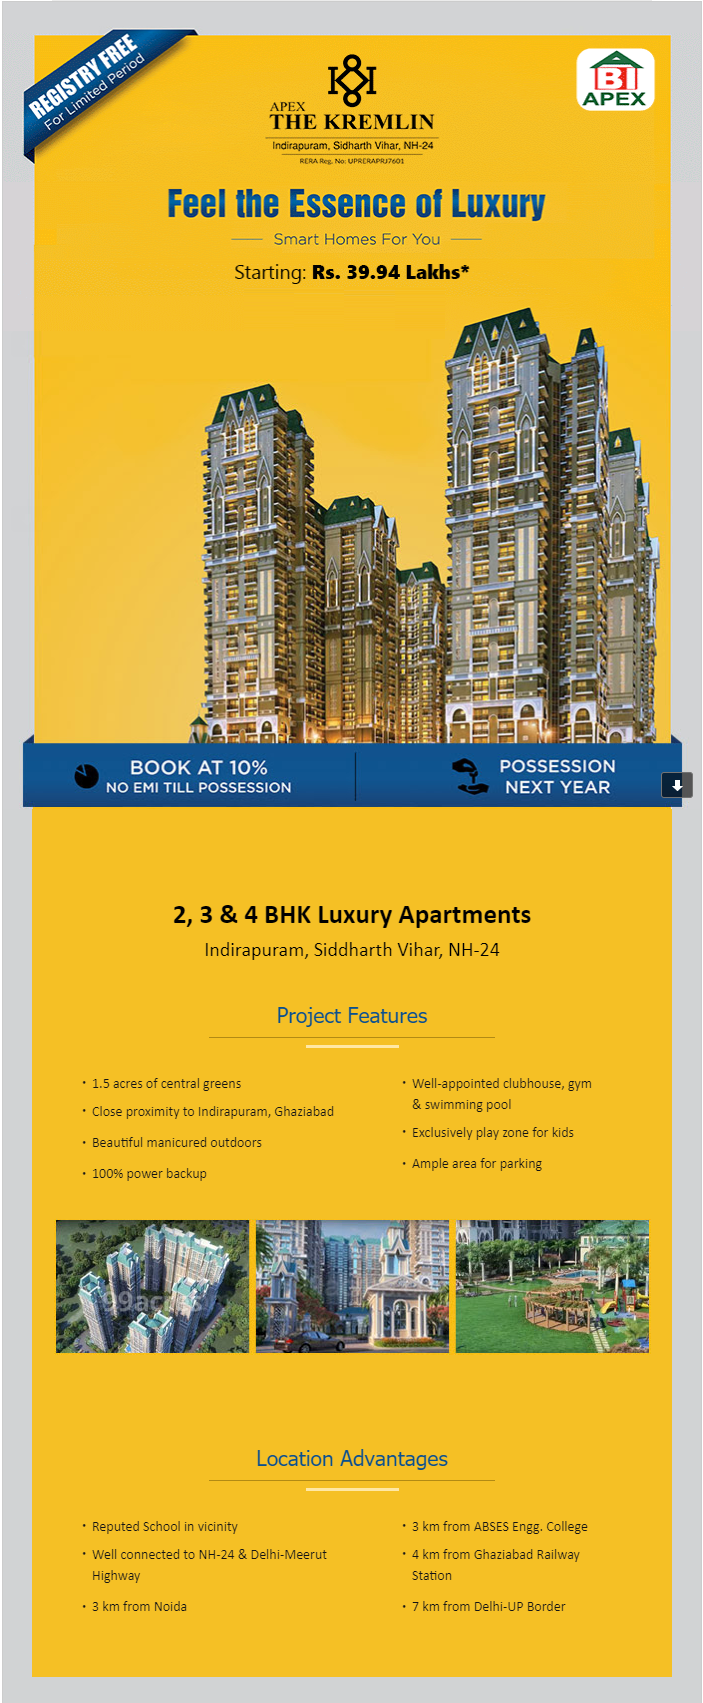 Book at 10% & no EMI till possession at Apex The Kremlin in Ghaziabad Update